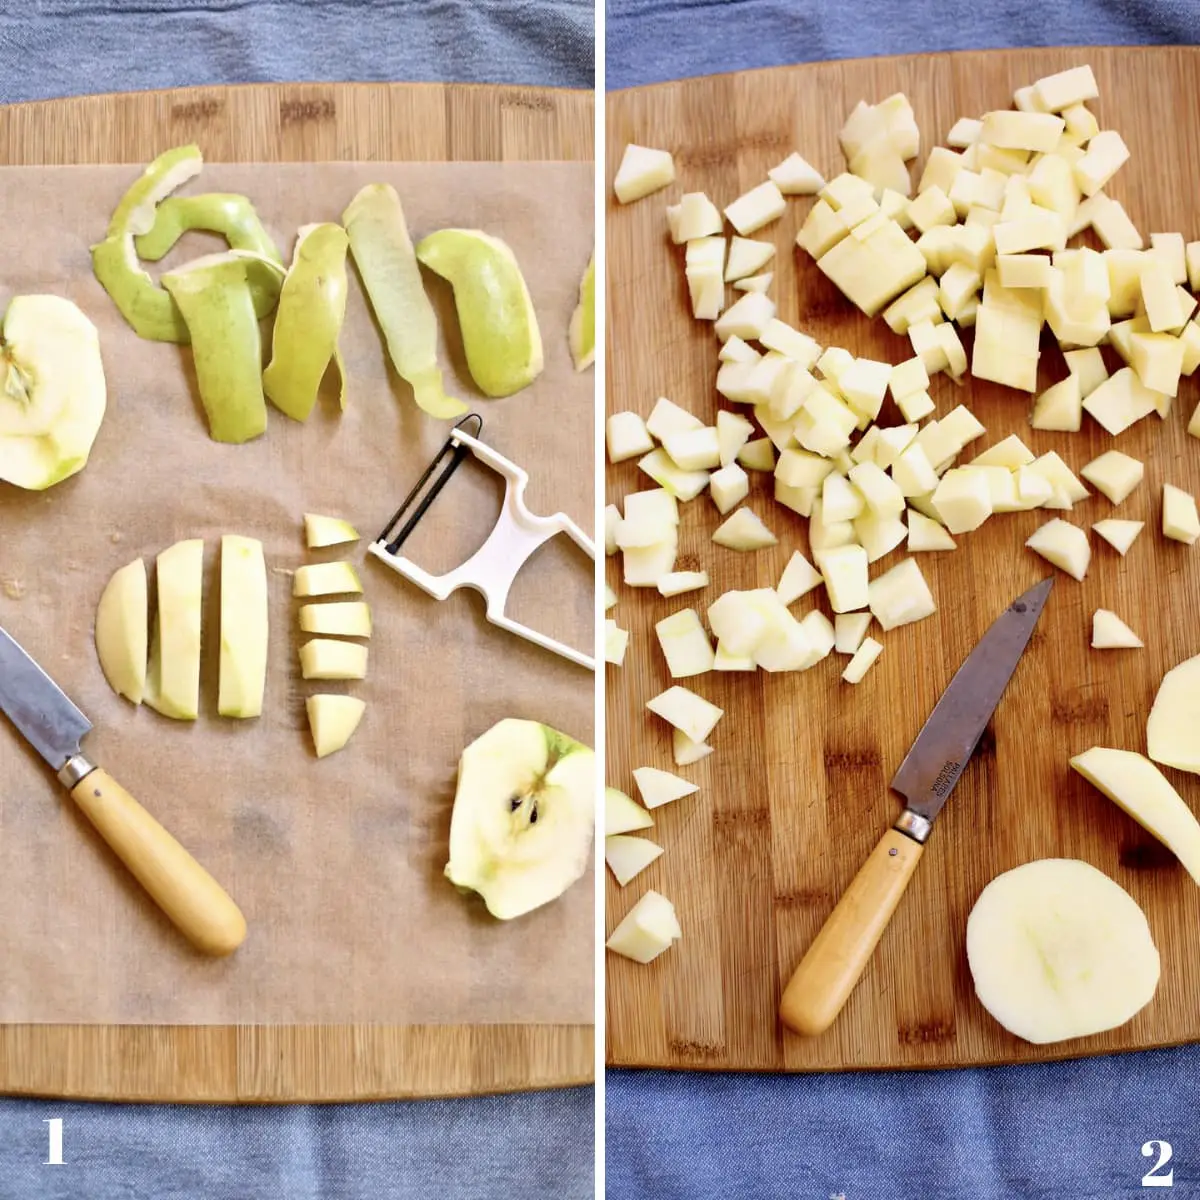 green apples in various stages of peeling and chopping